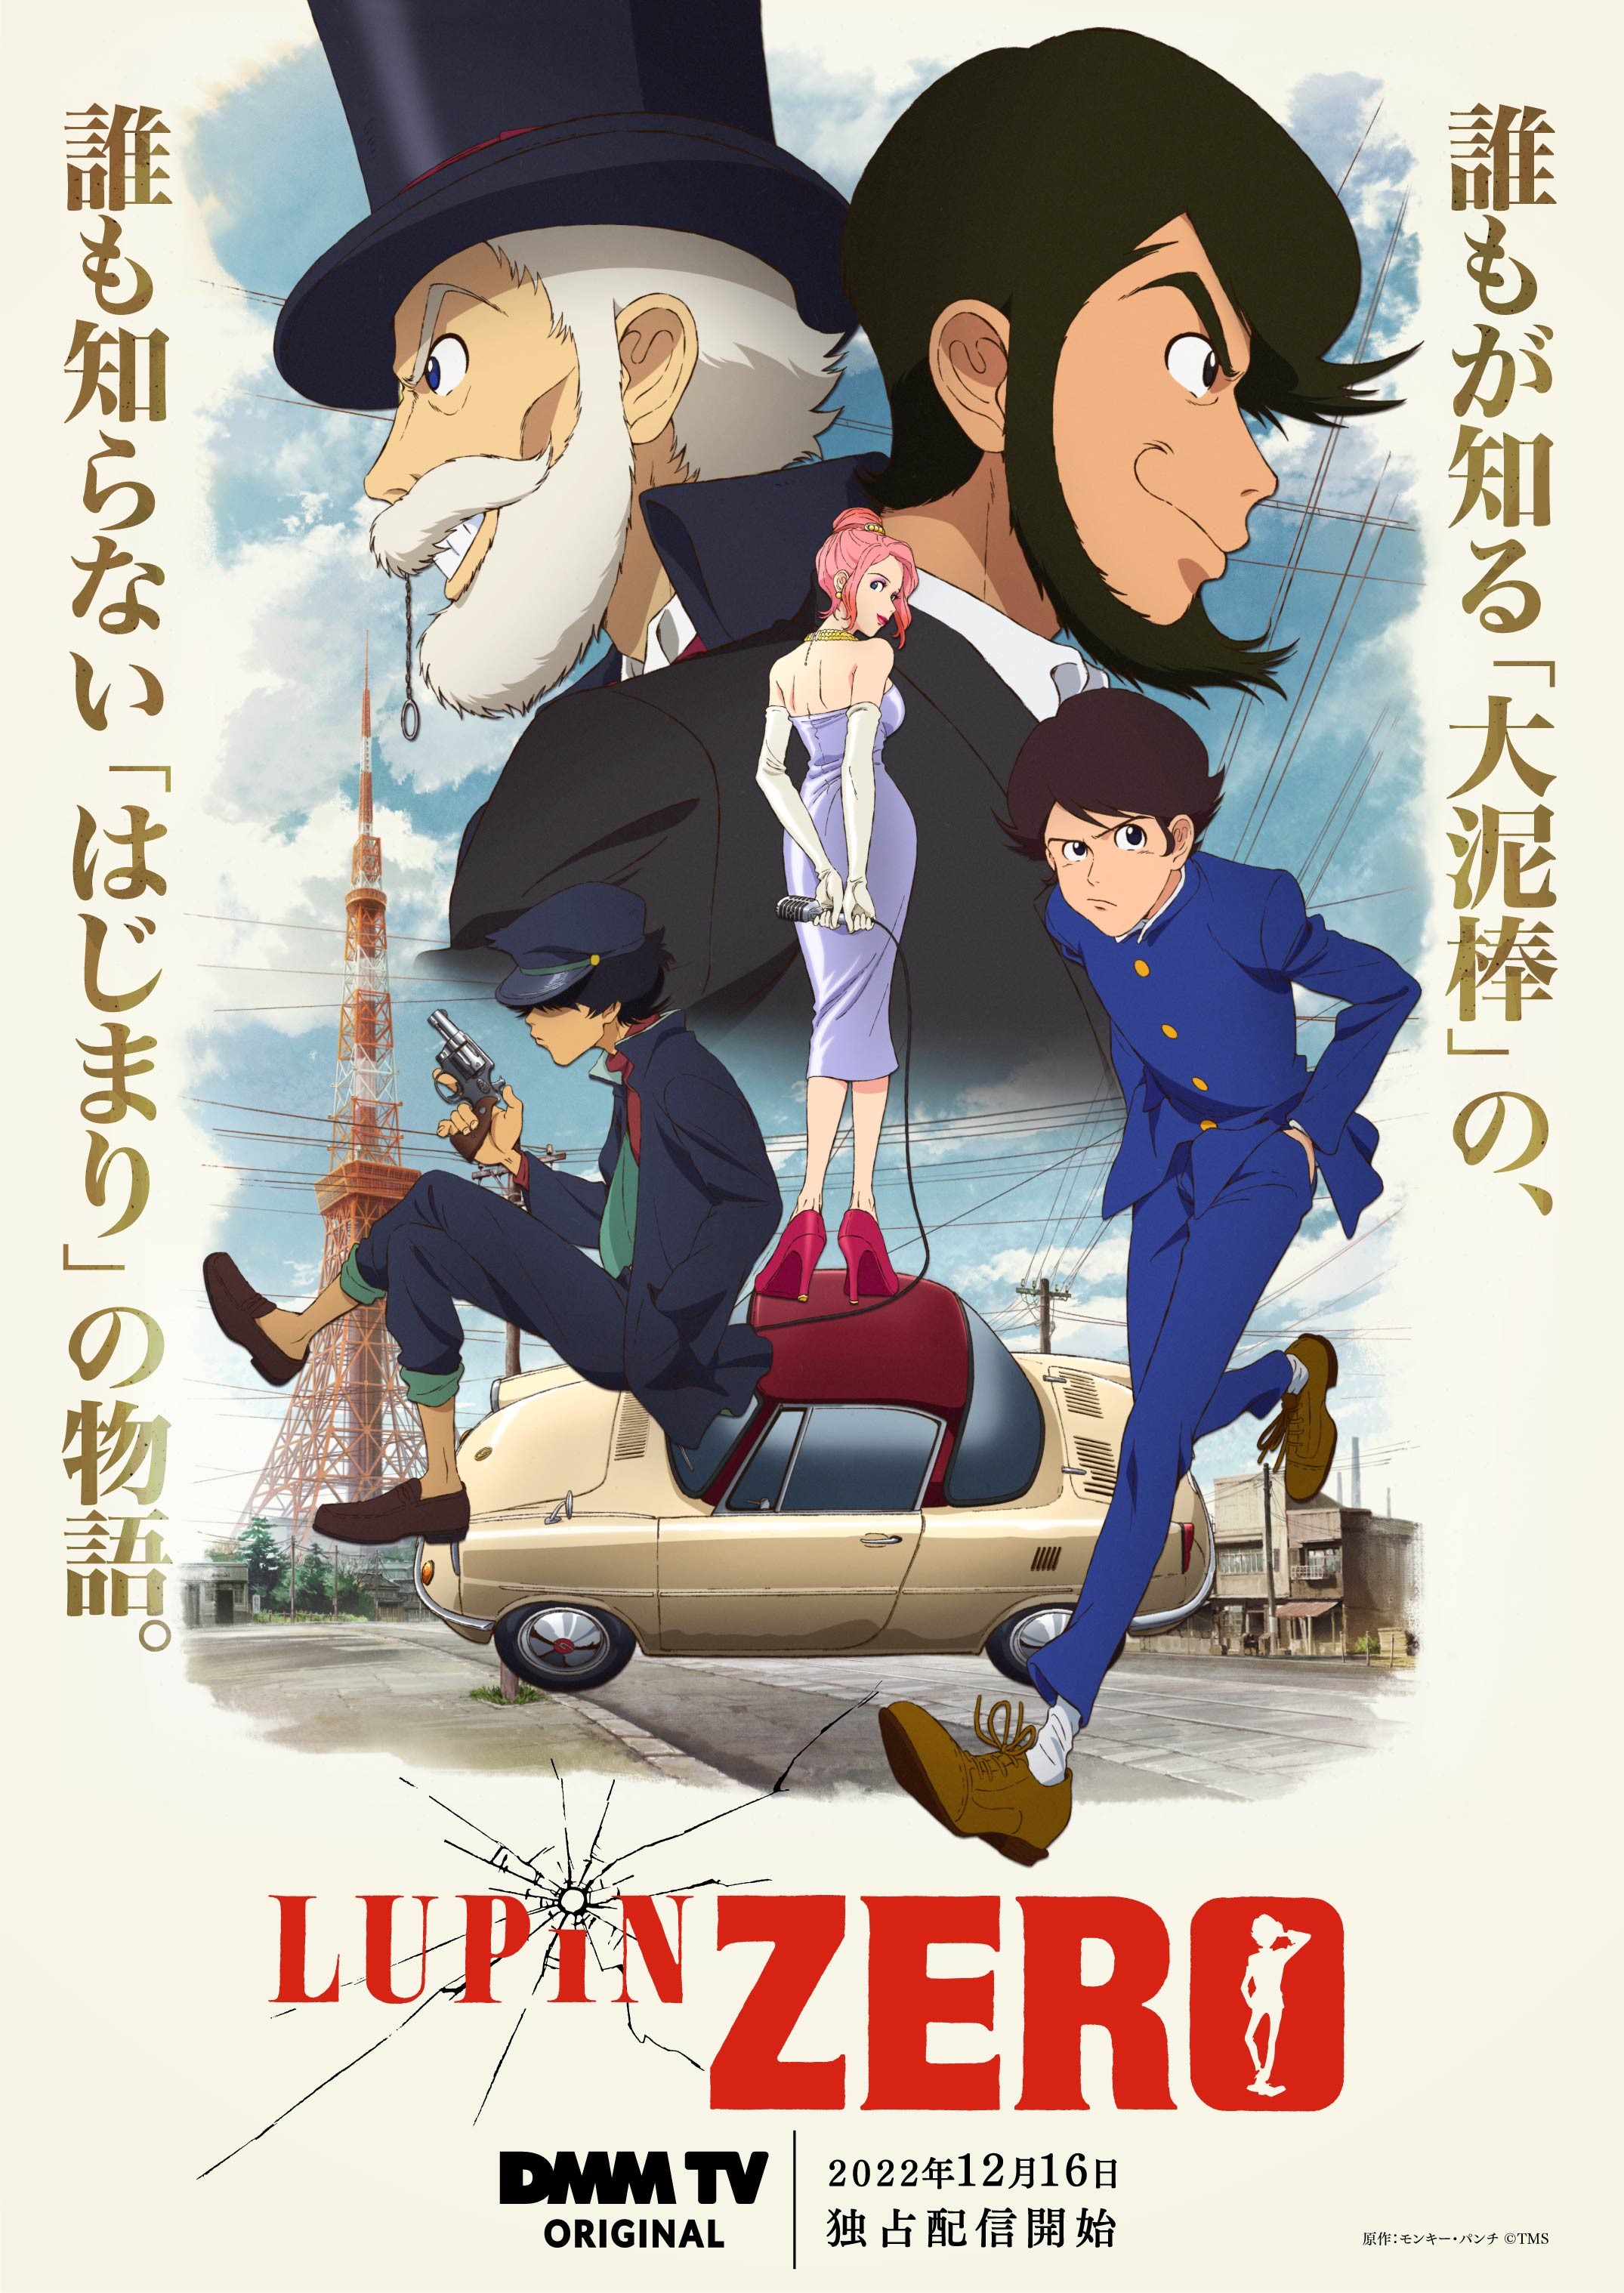 lupinthe3rd - Twitter Search / Twitter